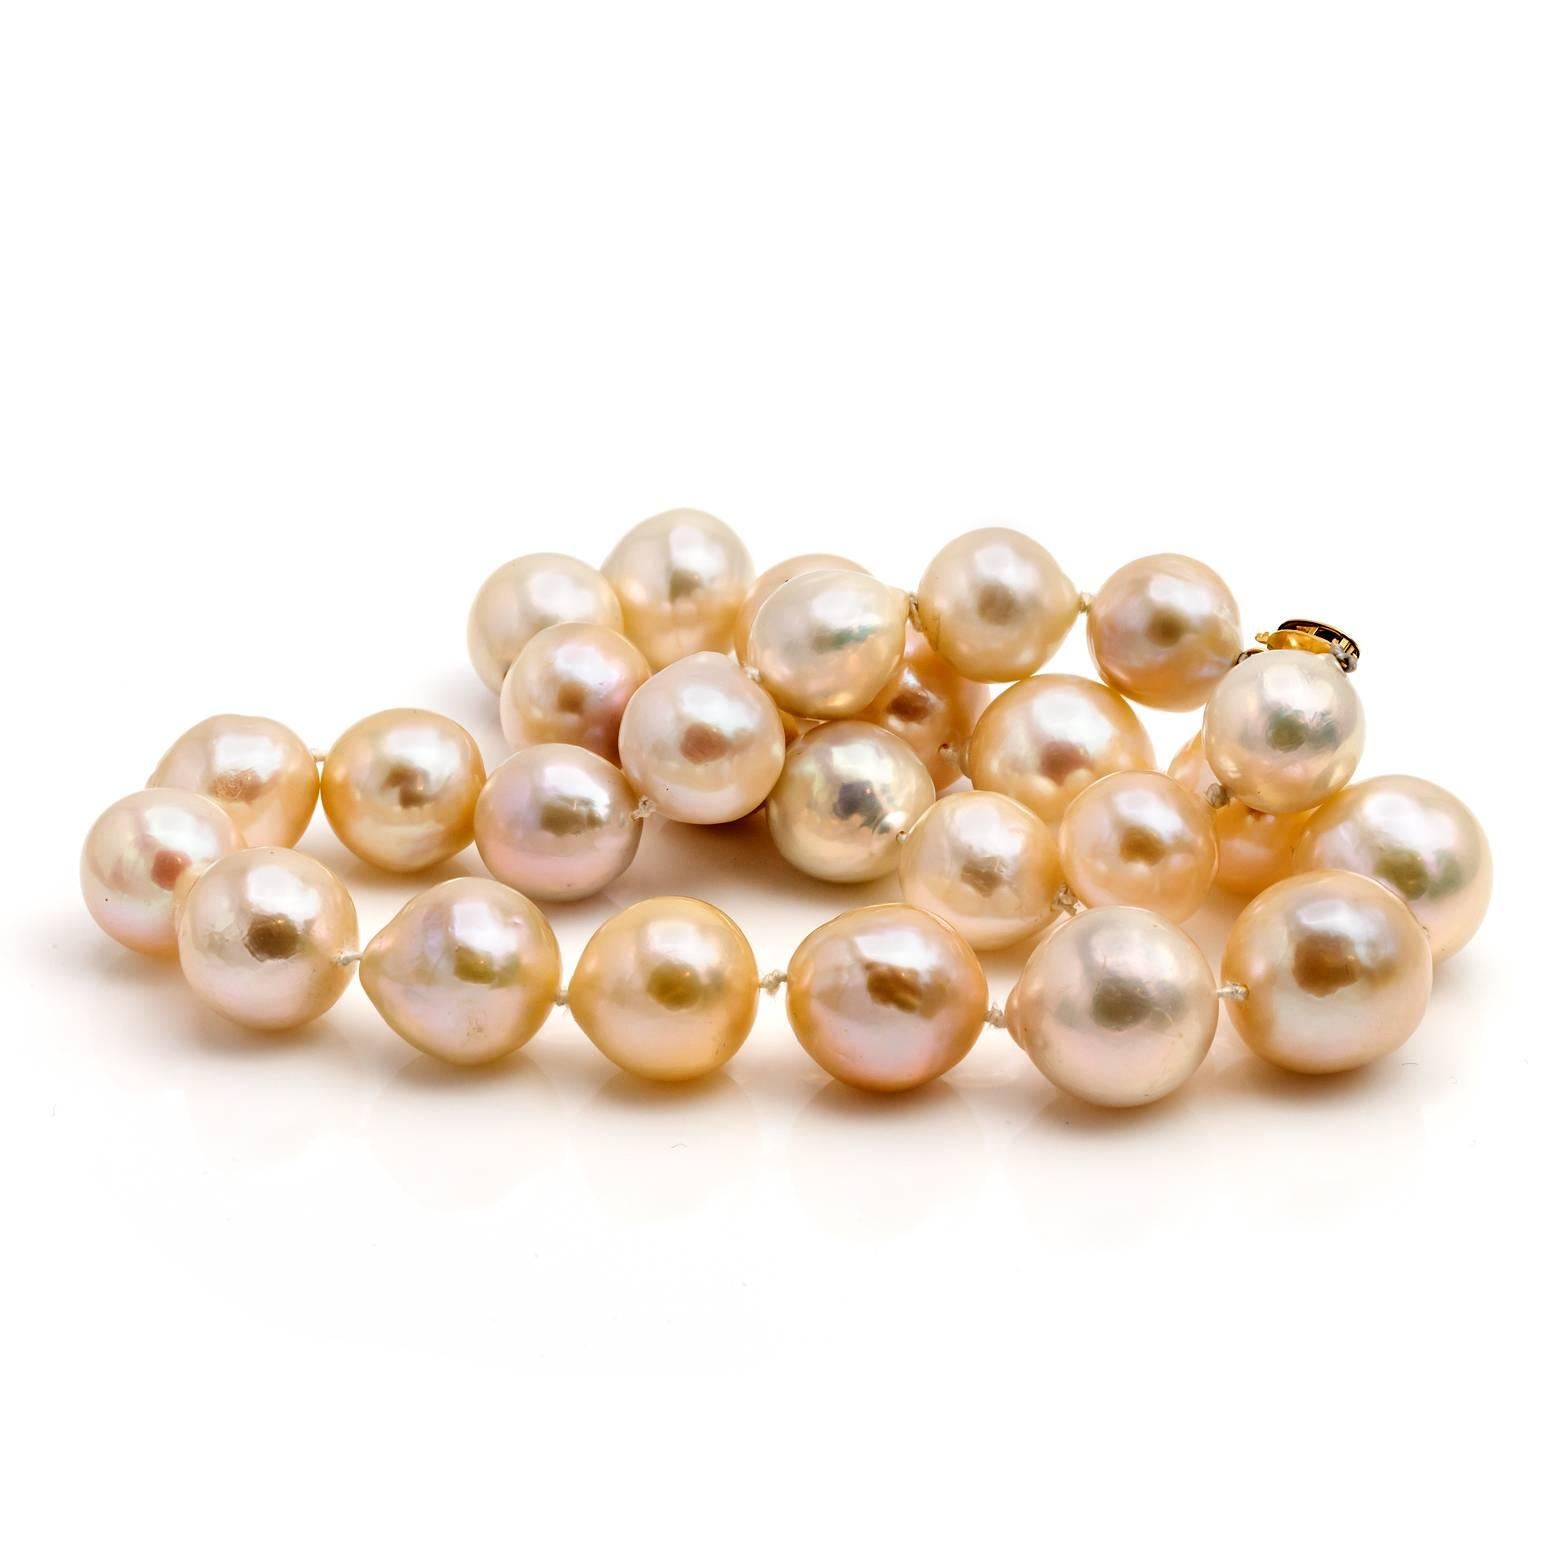 Large Fresh Water Pearl Necklace in Light Peachy Pink and Silver Hues Gold Clasp 1